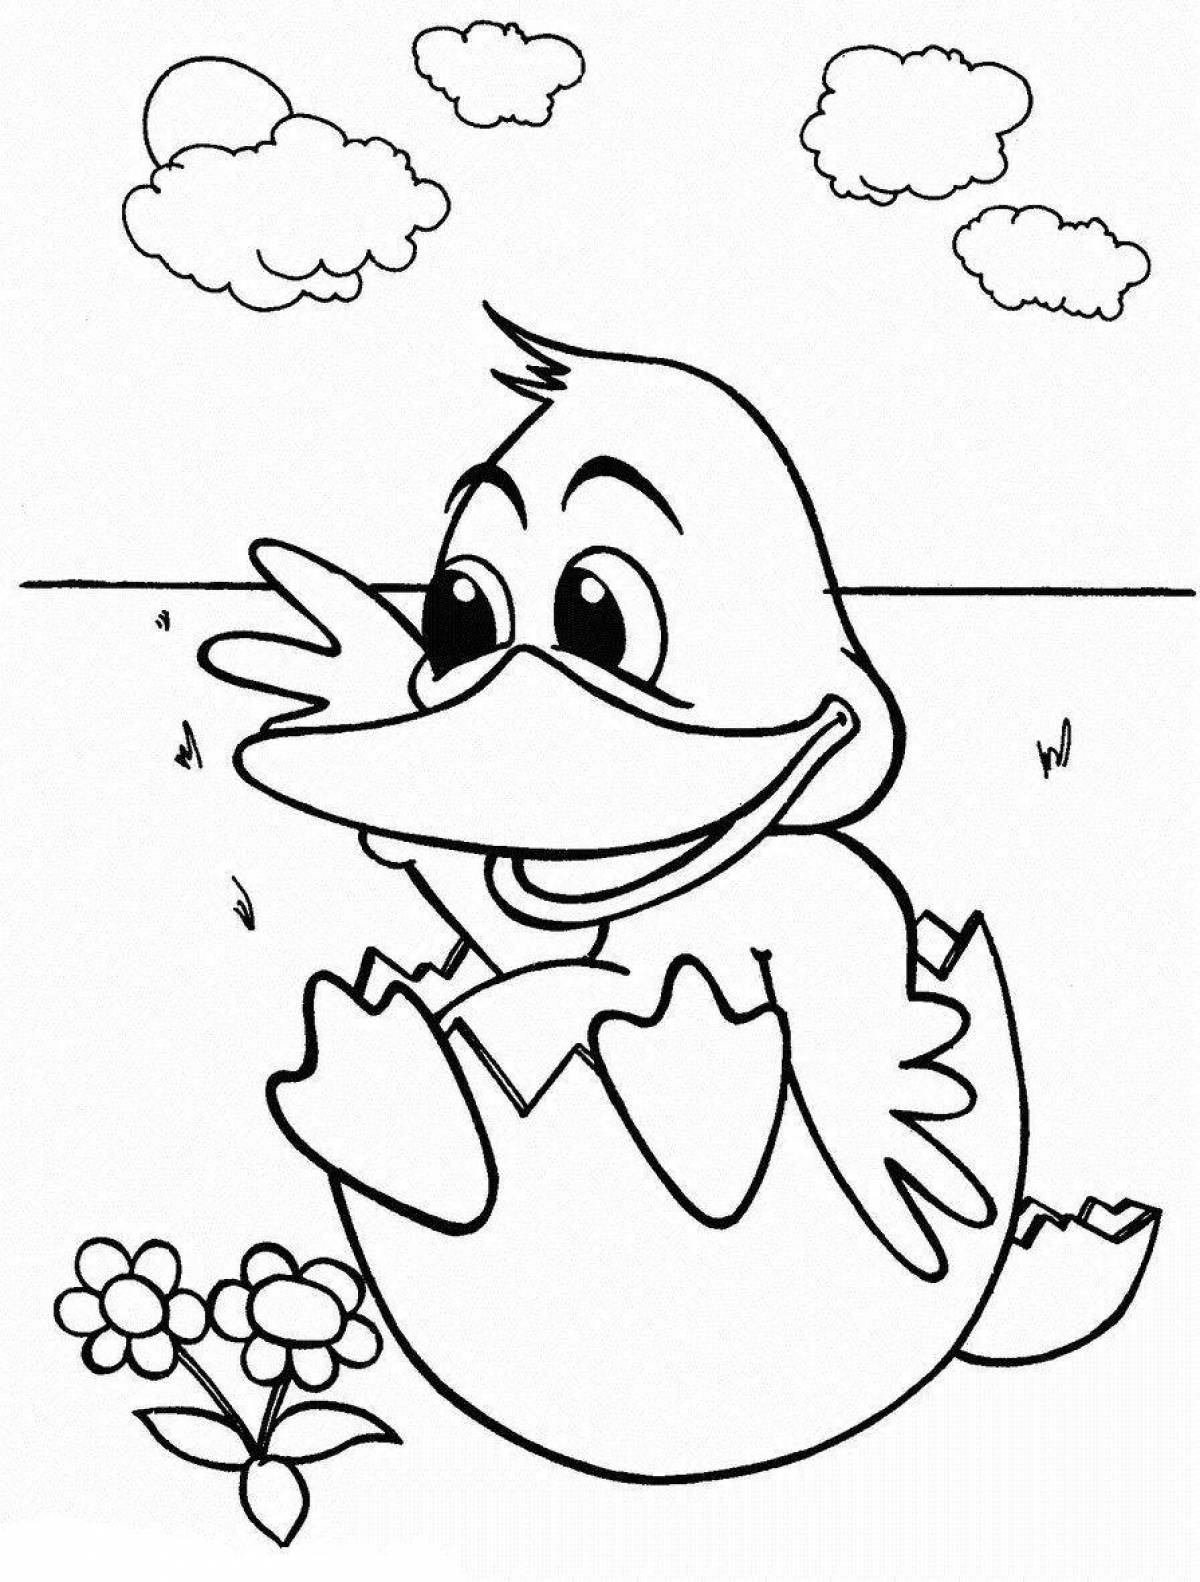 Animated duck and duckling coloring page